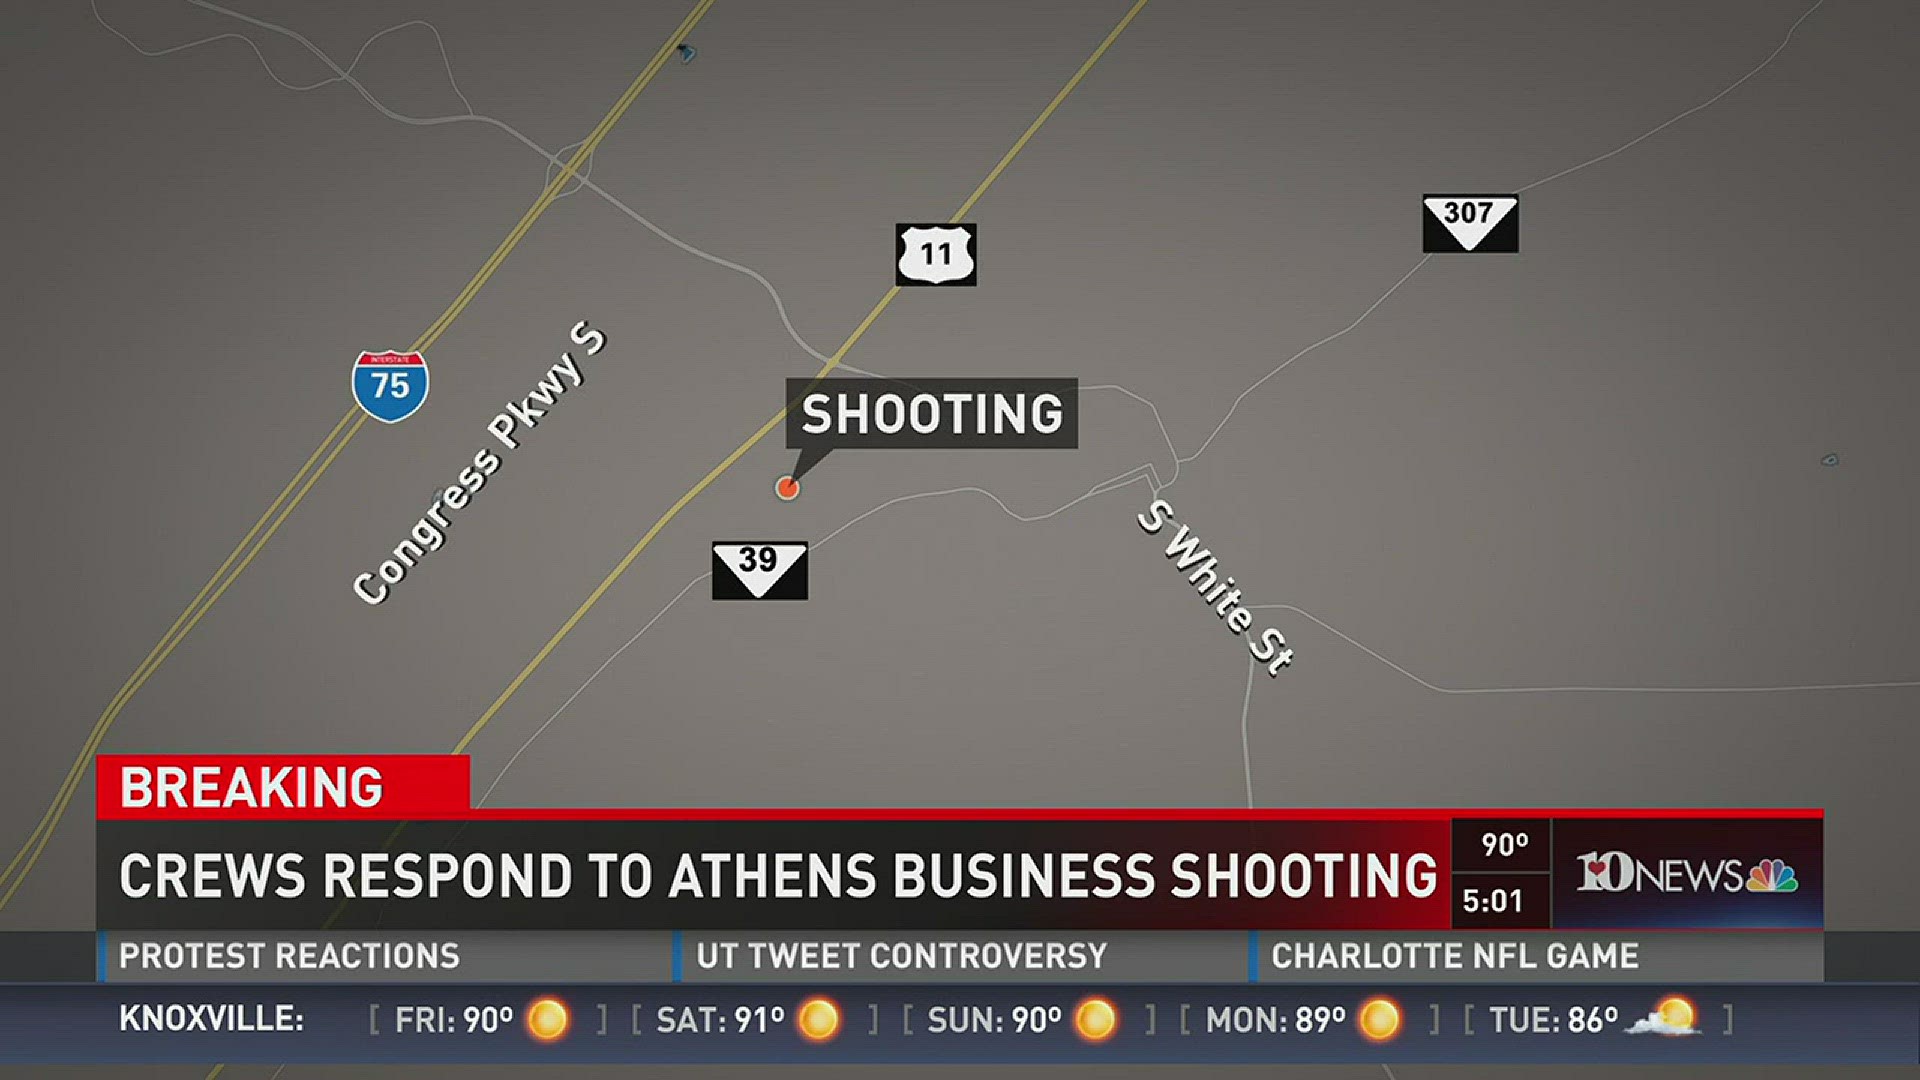 Authorities are investigating a report of a shooting at Thomas & Betts in Athens, Tennessee, according to McMinn County dispatch.